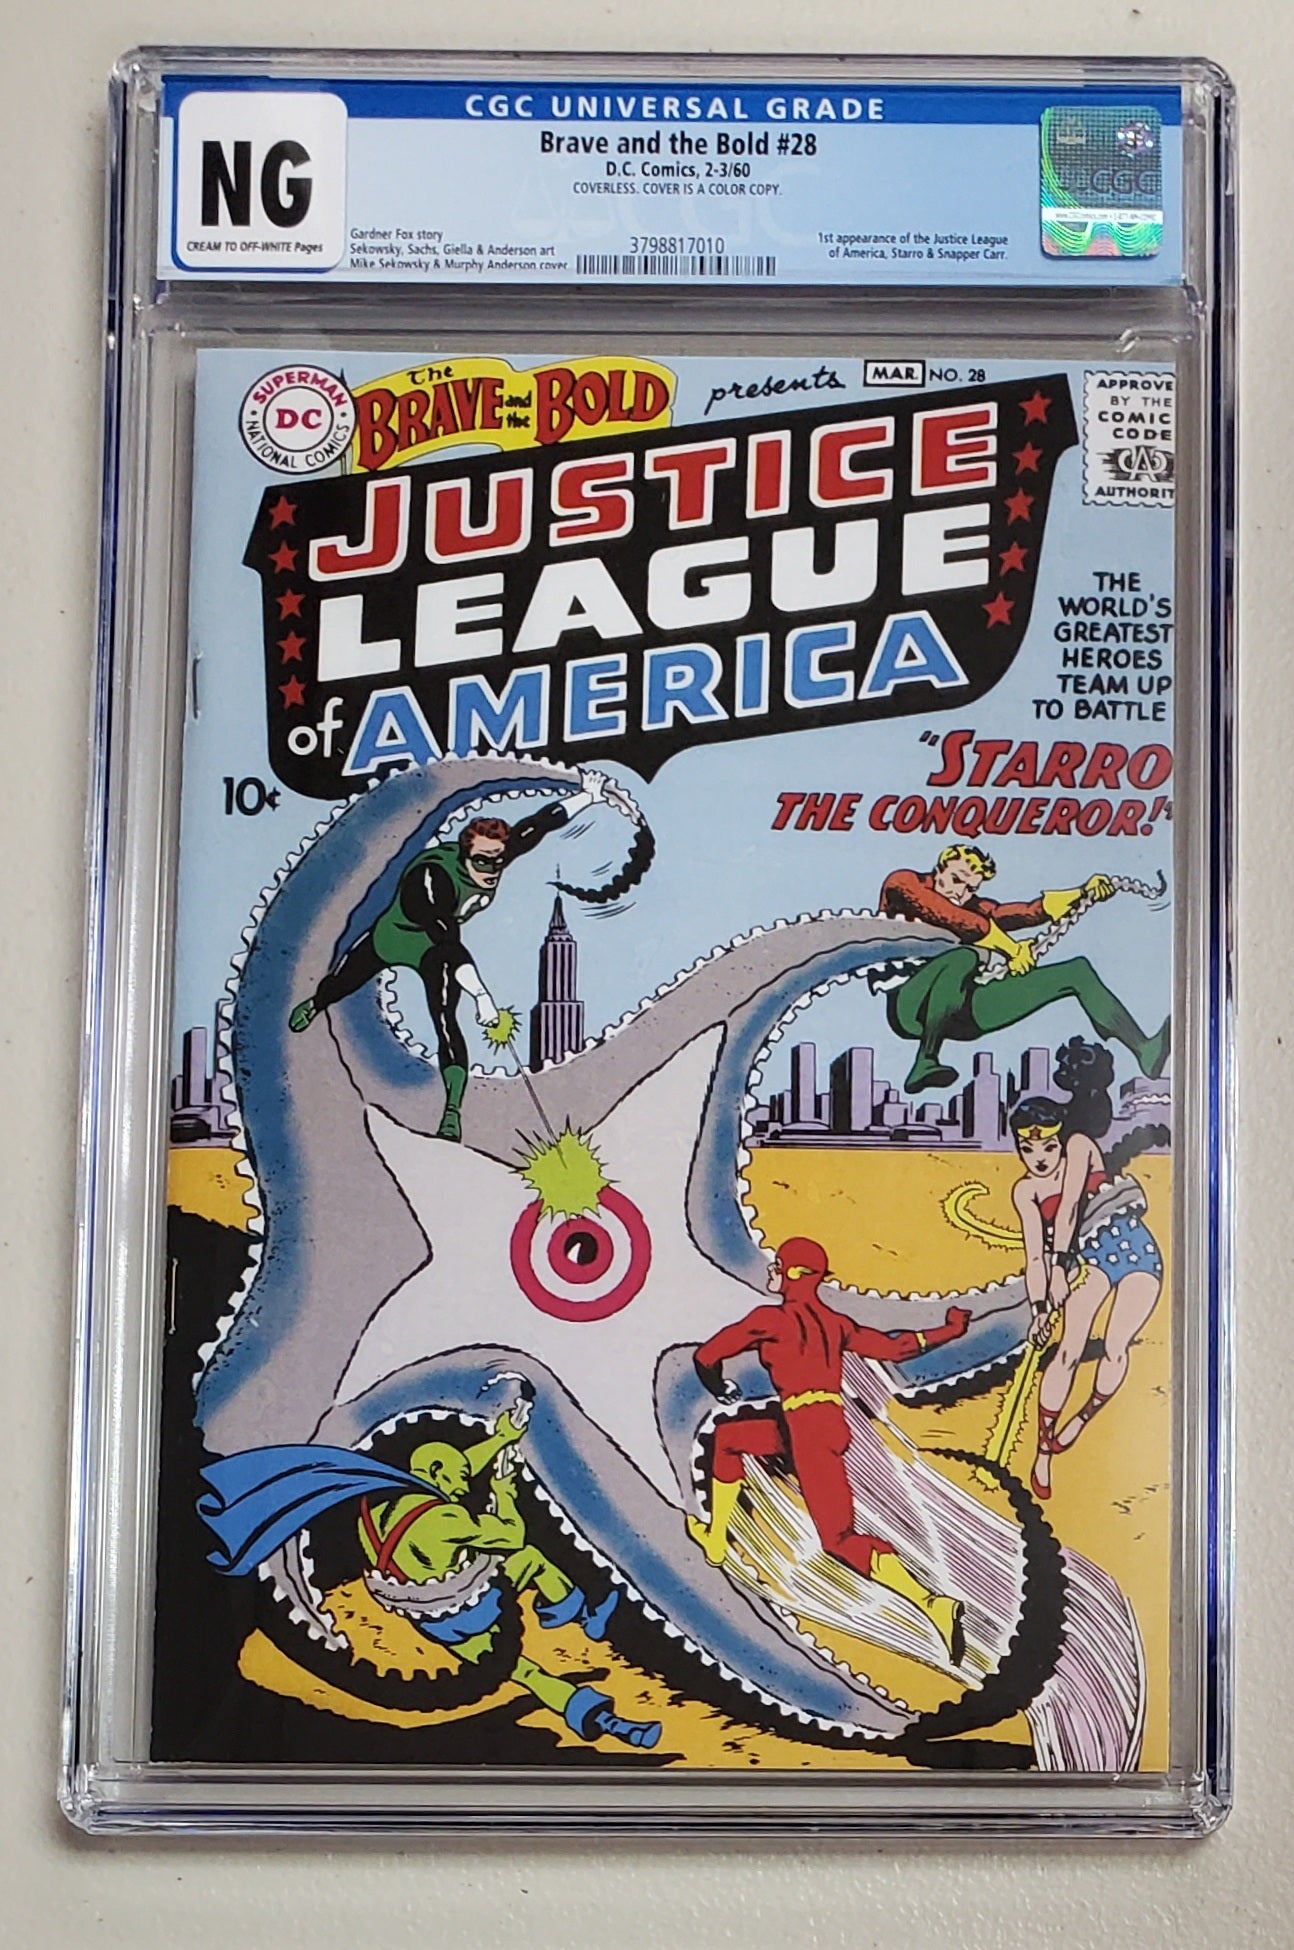 NG CGC 1960 BRAVE AND THE BOLD #28 1ST APP JUSTICE LEAGUE OF AMERICA, STARRO, SNAPPER CARR (COVERLESS NO GRADE.)  [3798817010]